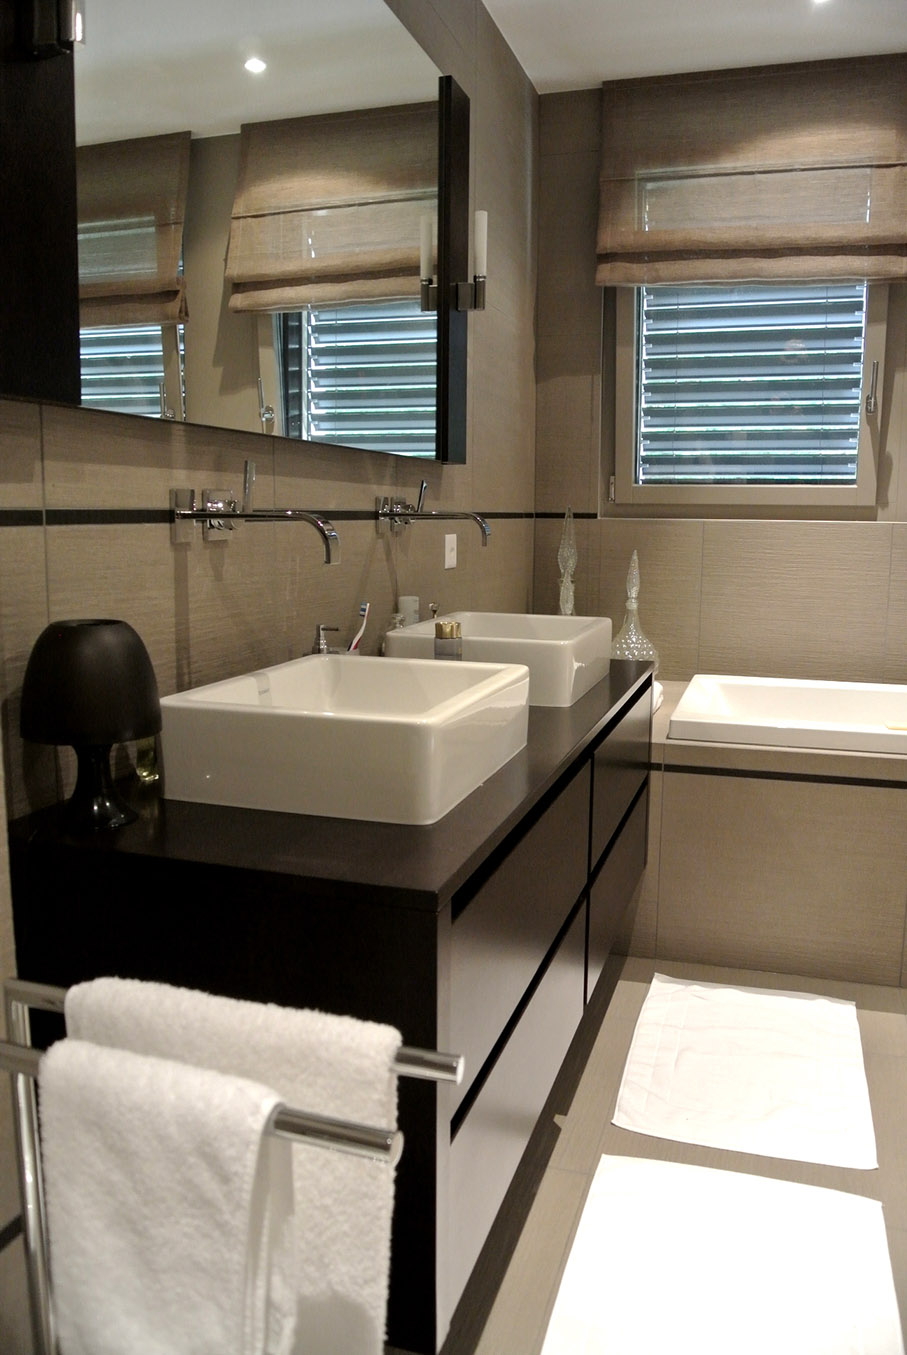 Fitted bathroom cabinets and dressings